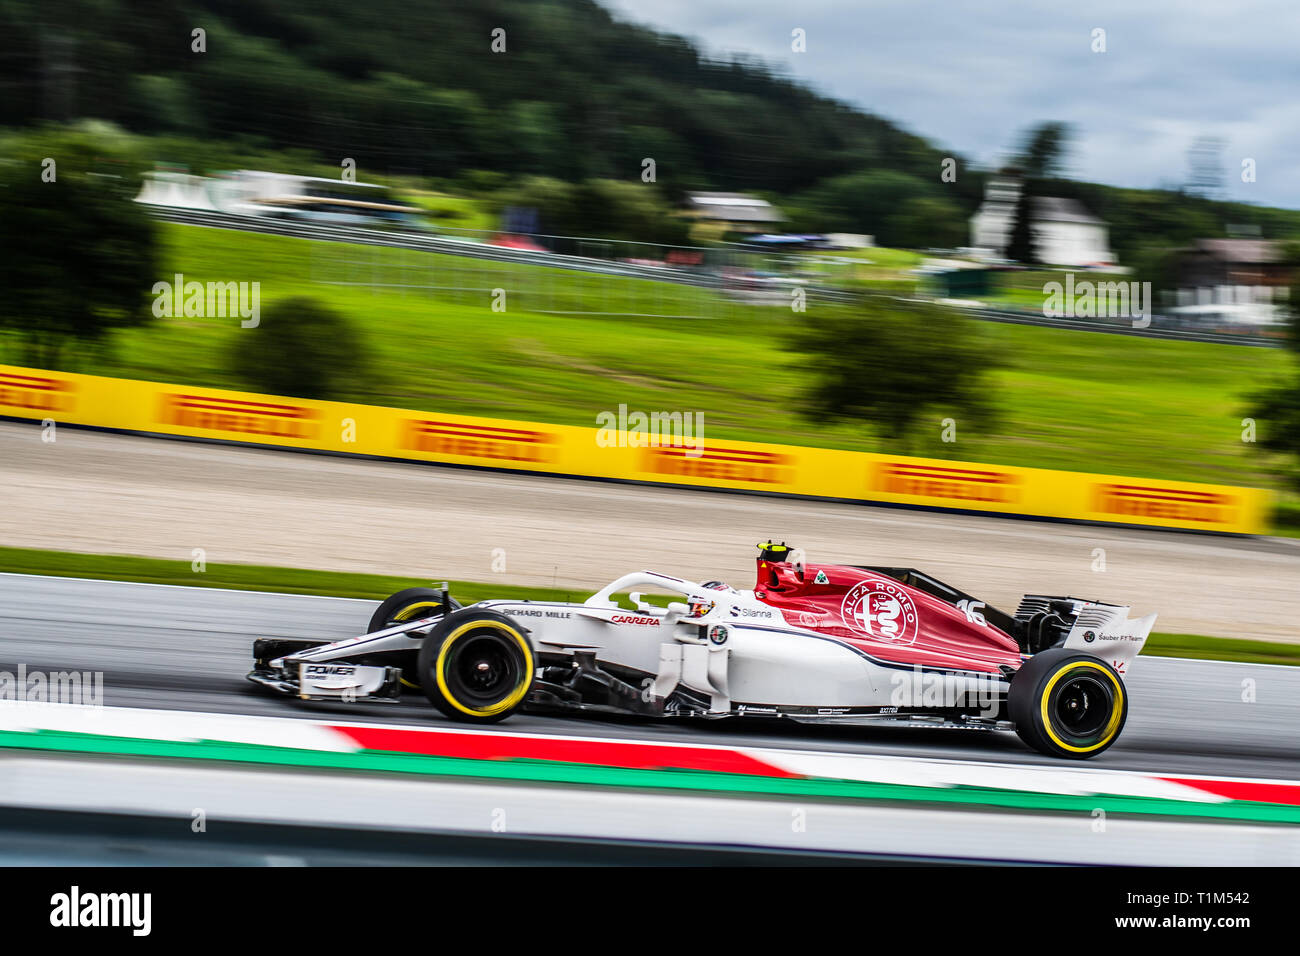 Spielberg/Austria - 06/29/2018 - #16 Charles LECLERC (MCO) in his Alfa Romeo Sauber C37 during FP1 ahead of the 2018 Austrian Grand Prix at the Red Bu Stock Photo